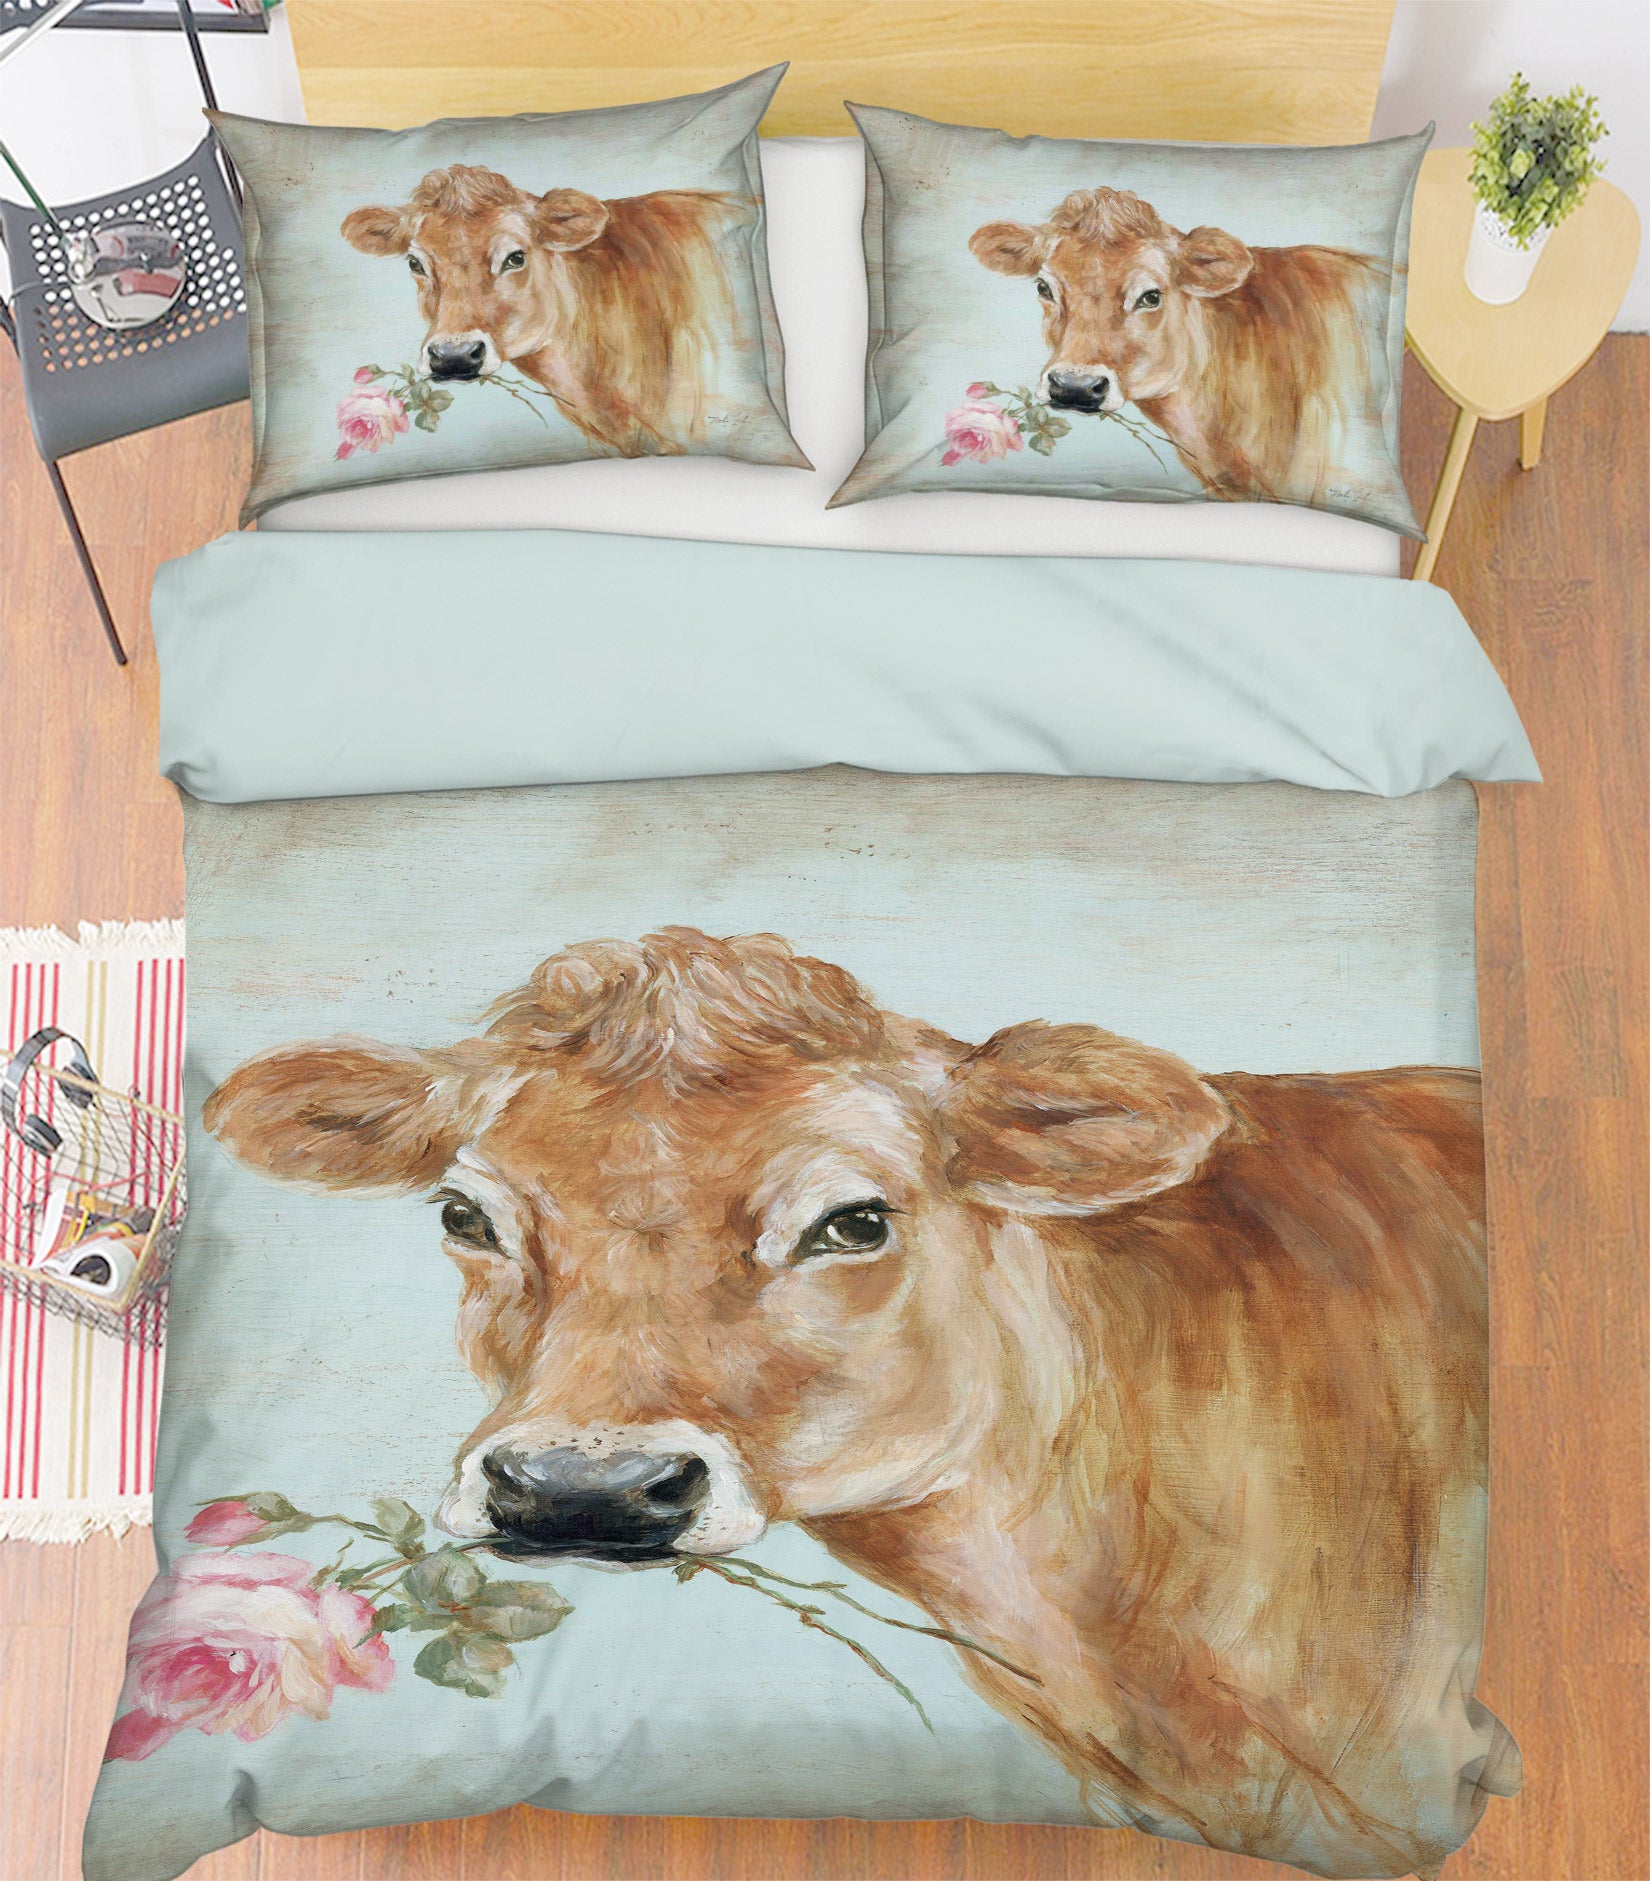 3D Cow Flower 2113 Debi Coules Bedding Bed Pillowcases Quilt